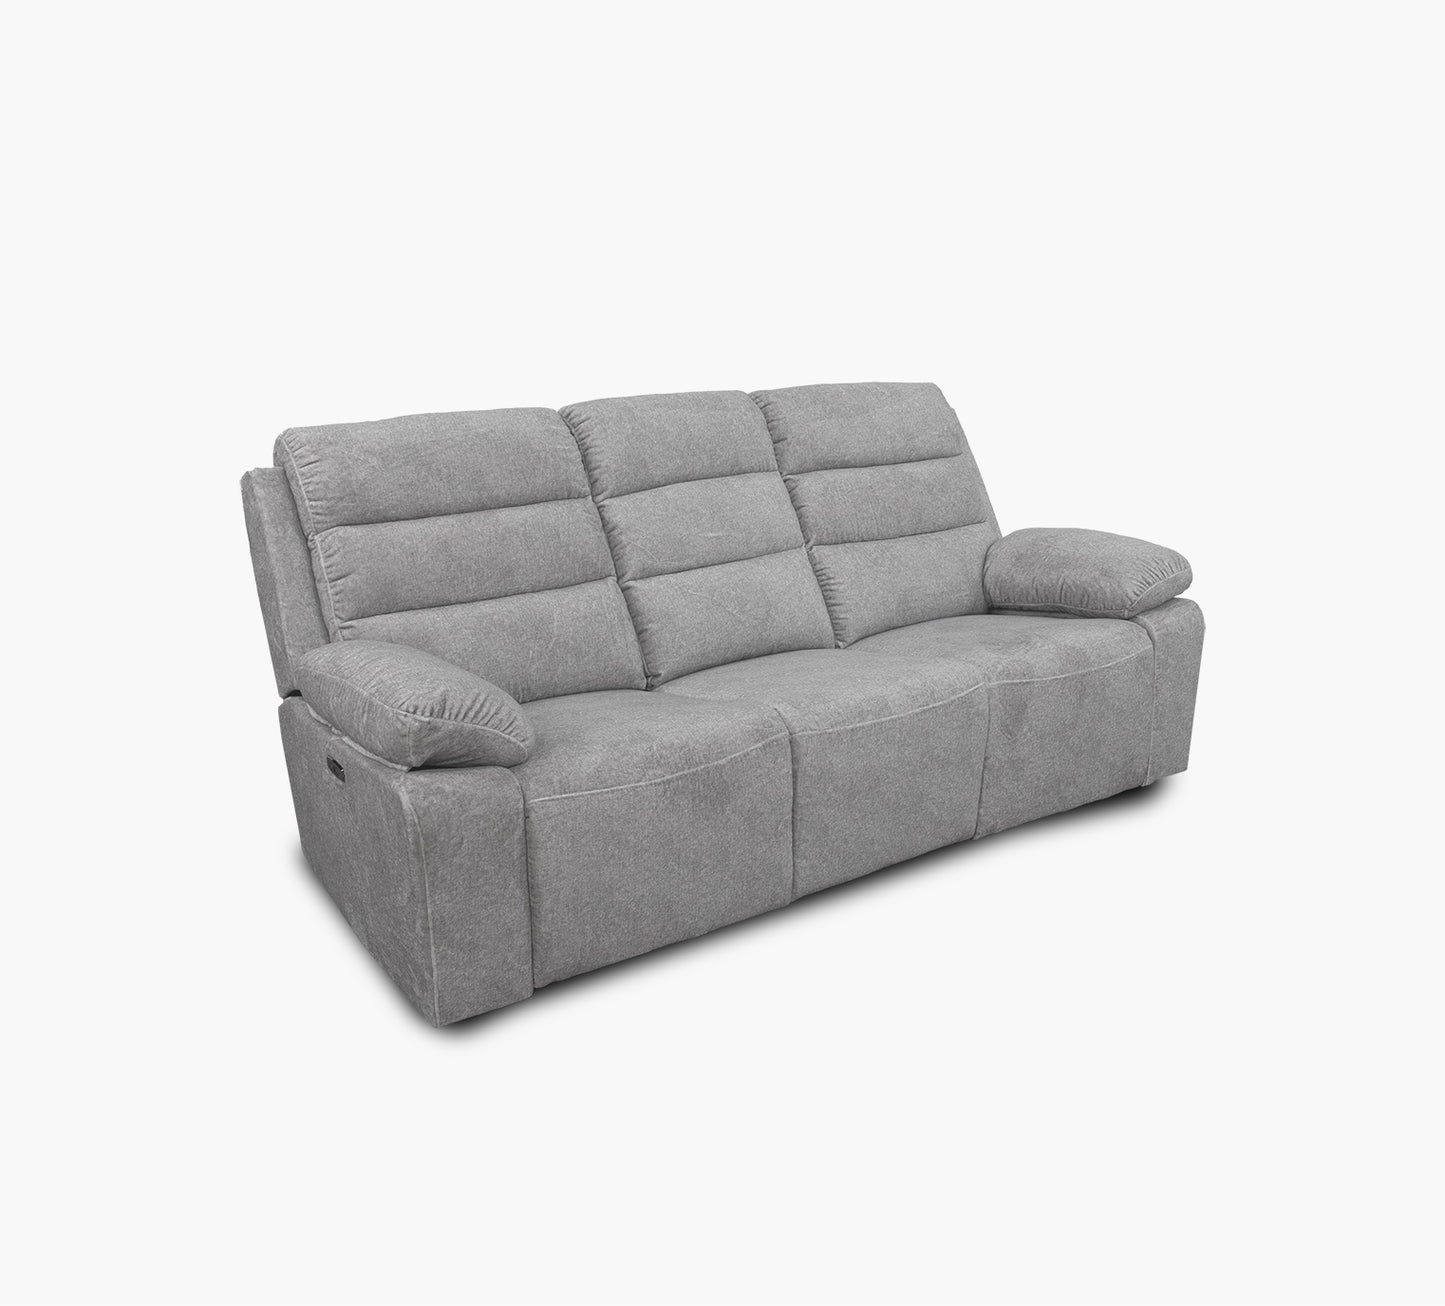 Forester Reclining Sofa